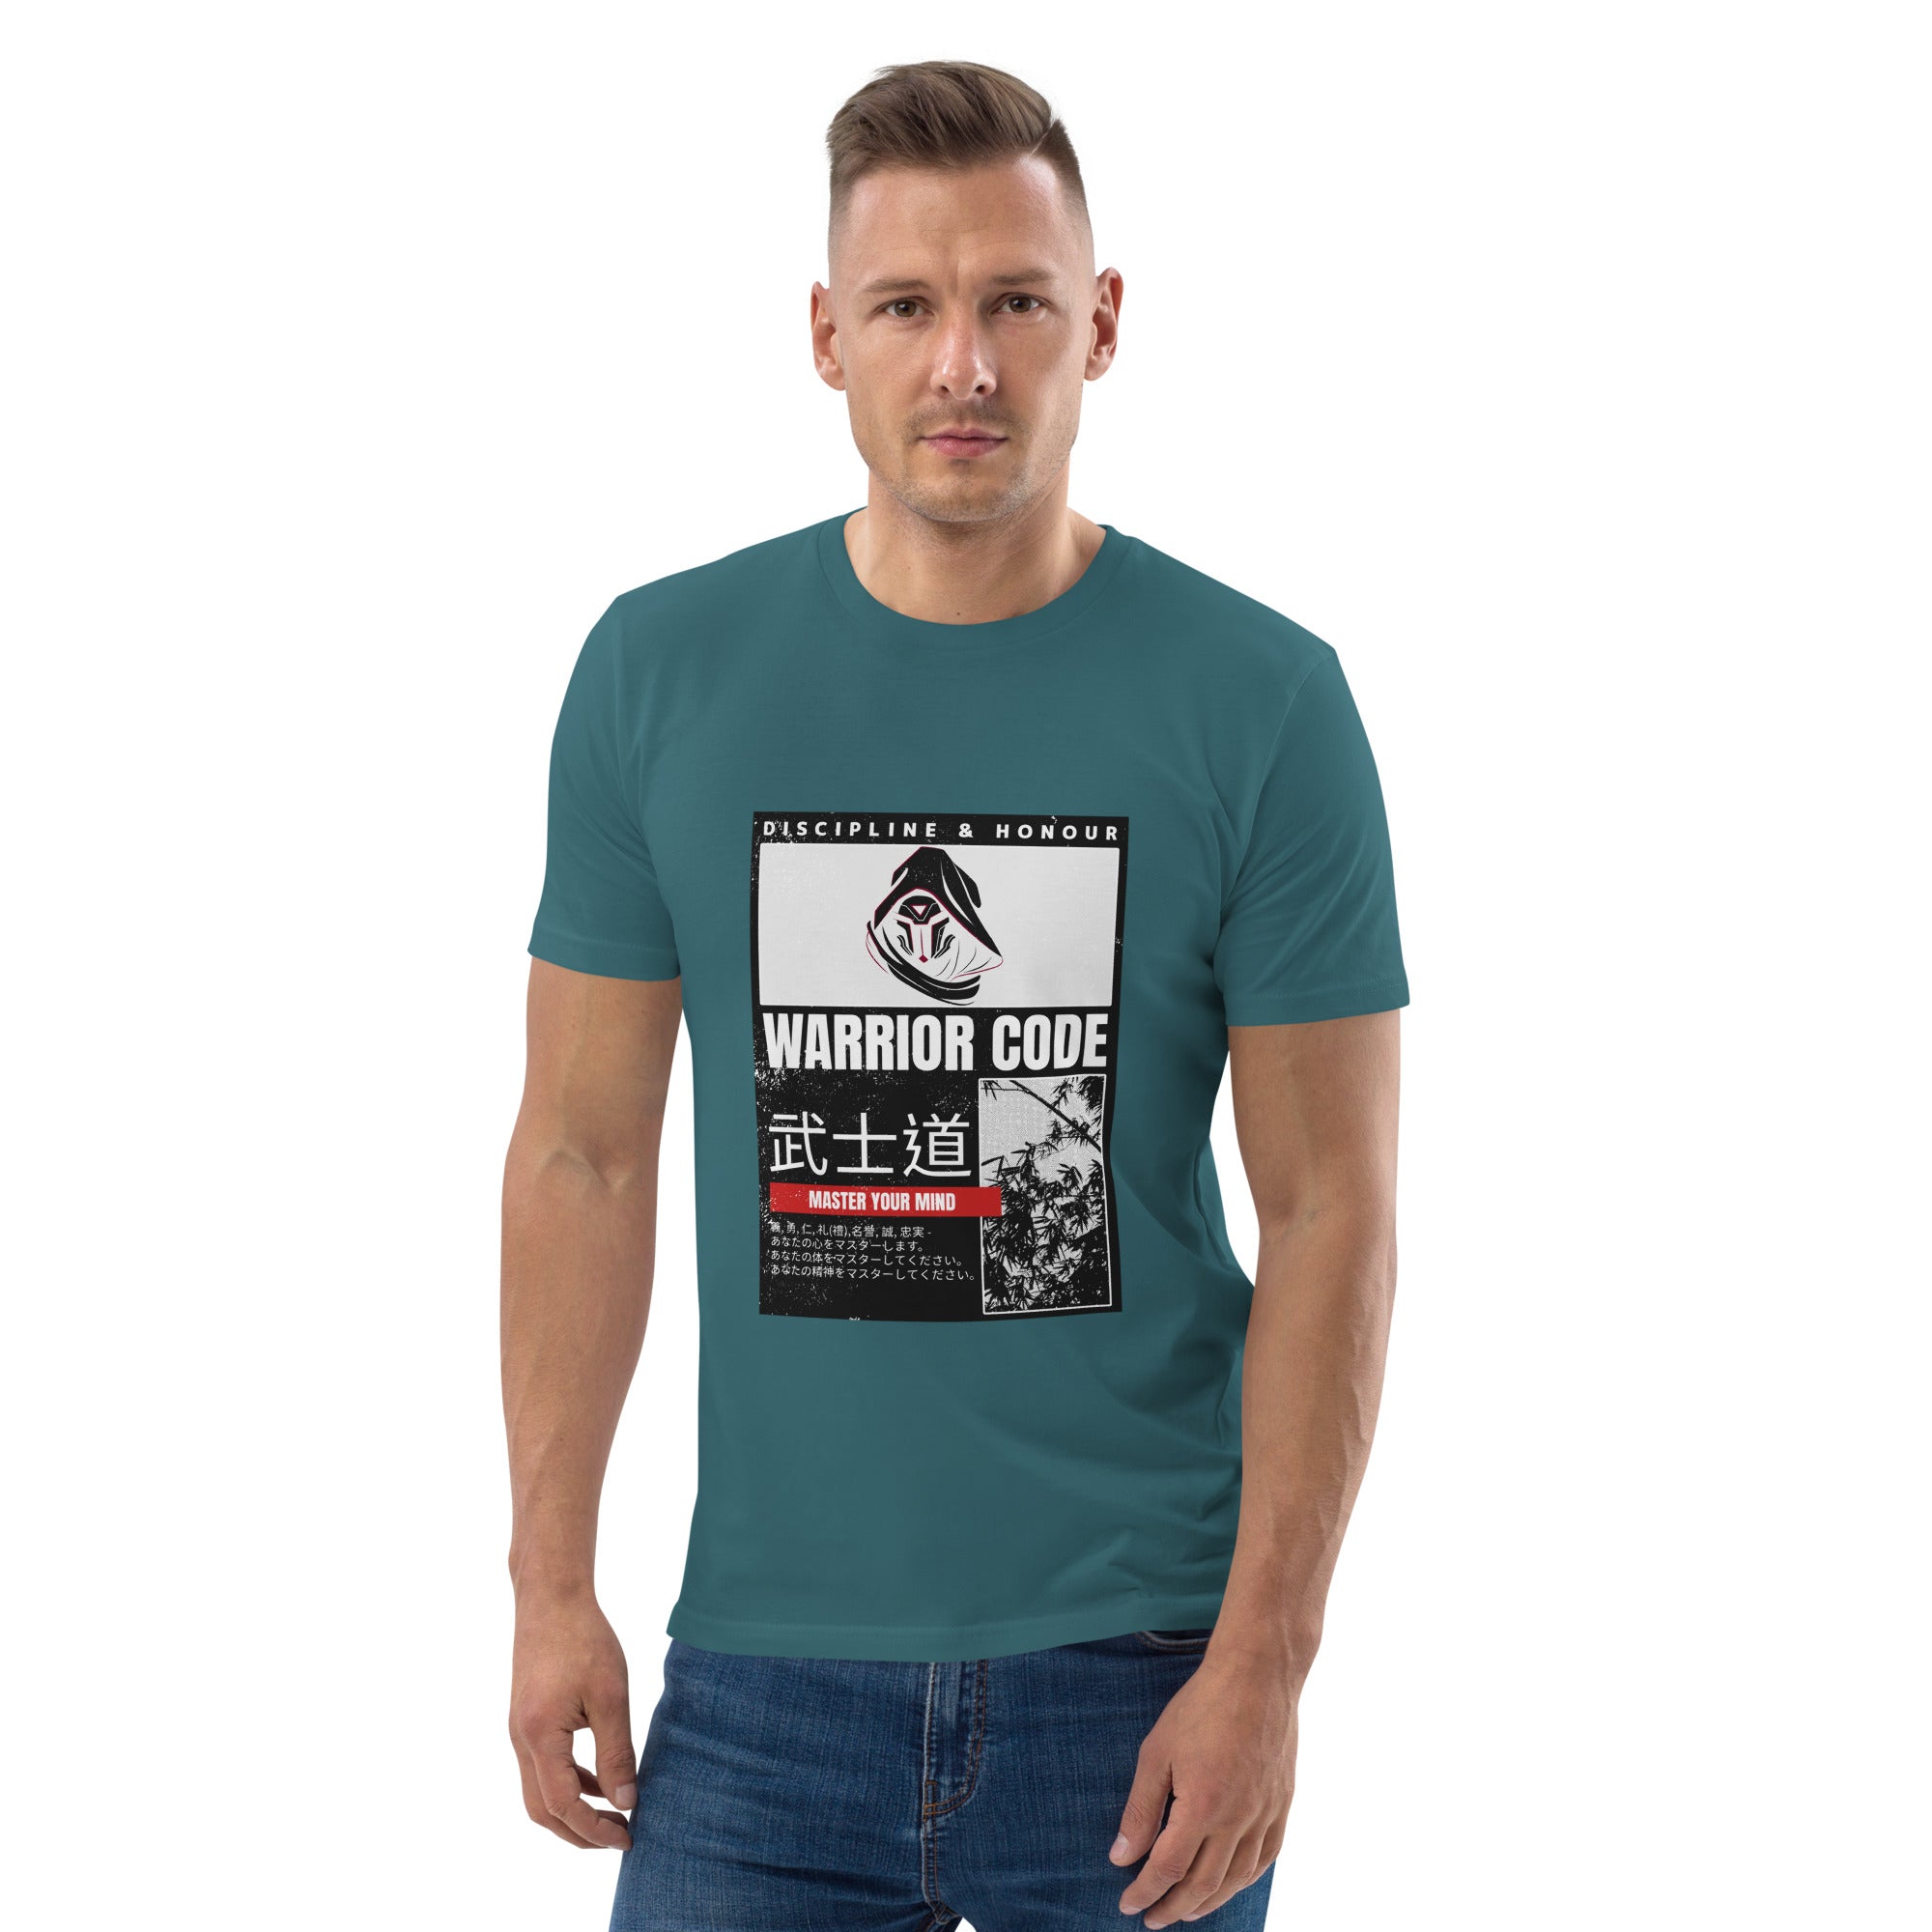 Obey the Code - Unisex organic cotton t-shirt